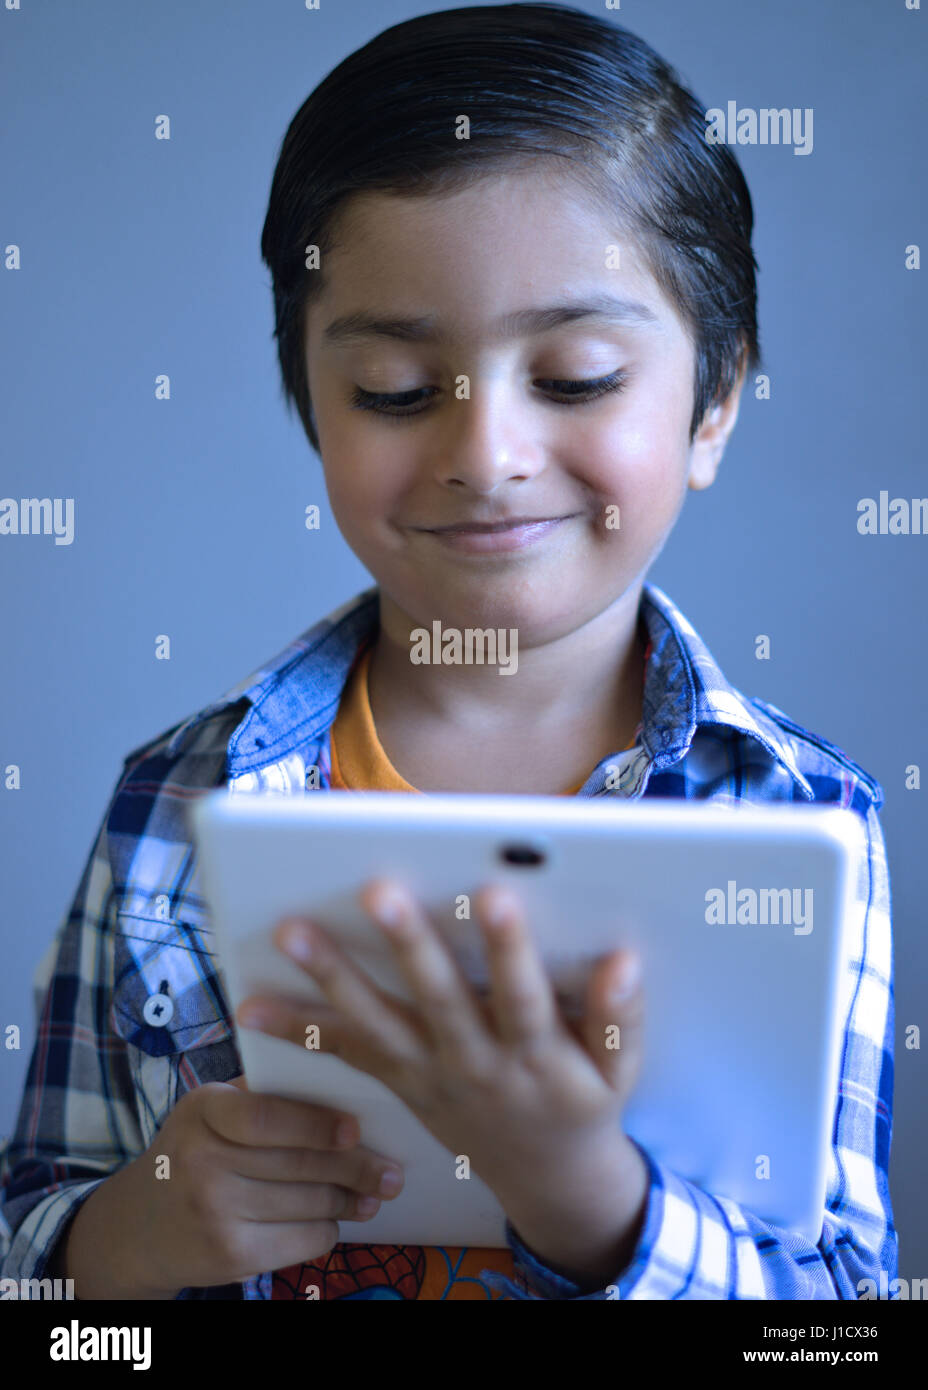 Kid with tablet computer. Child thinking holding tablet. Smiling kid with digital technology looking at the tablet. Stock Photo